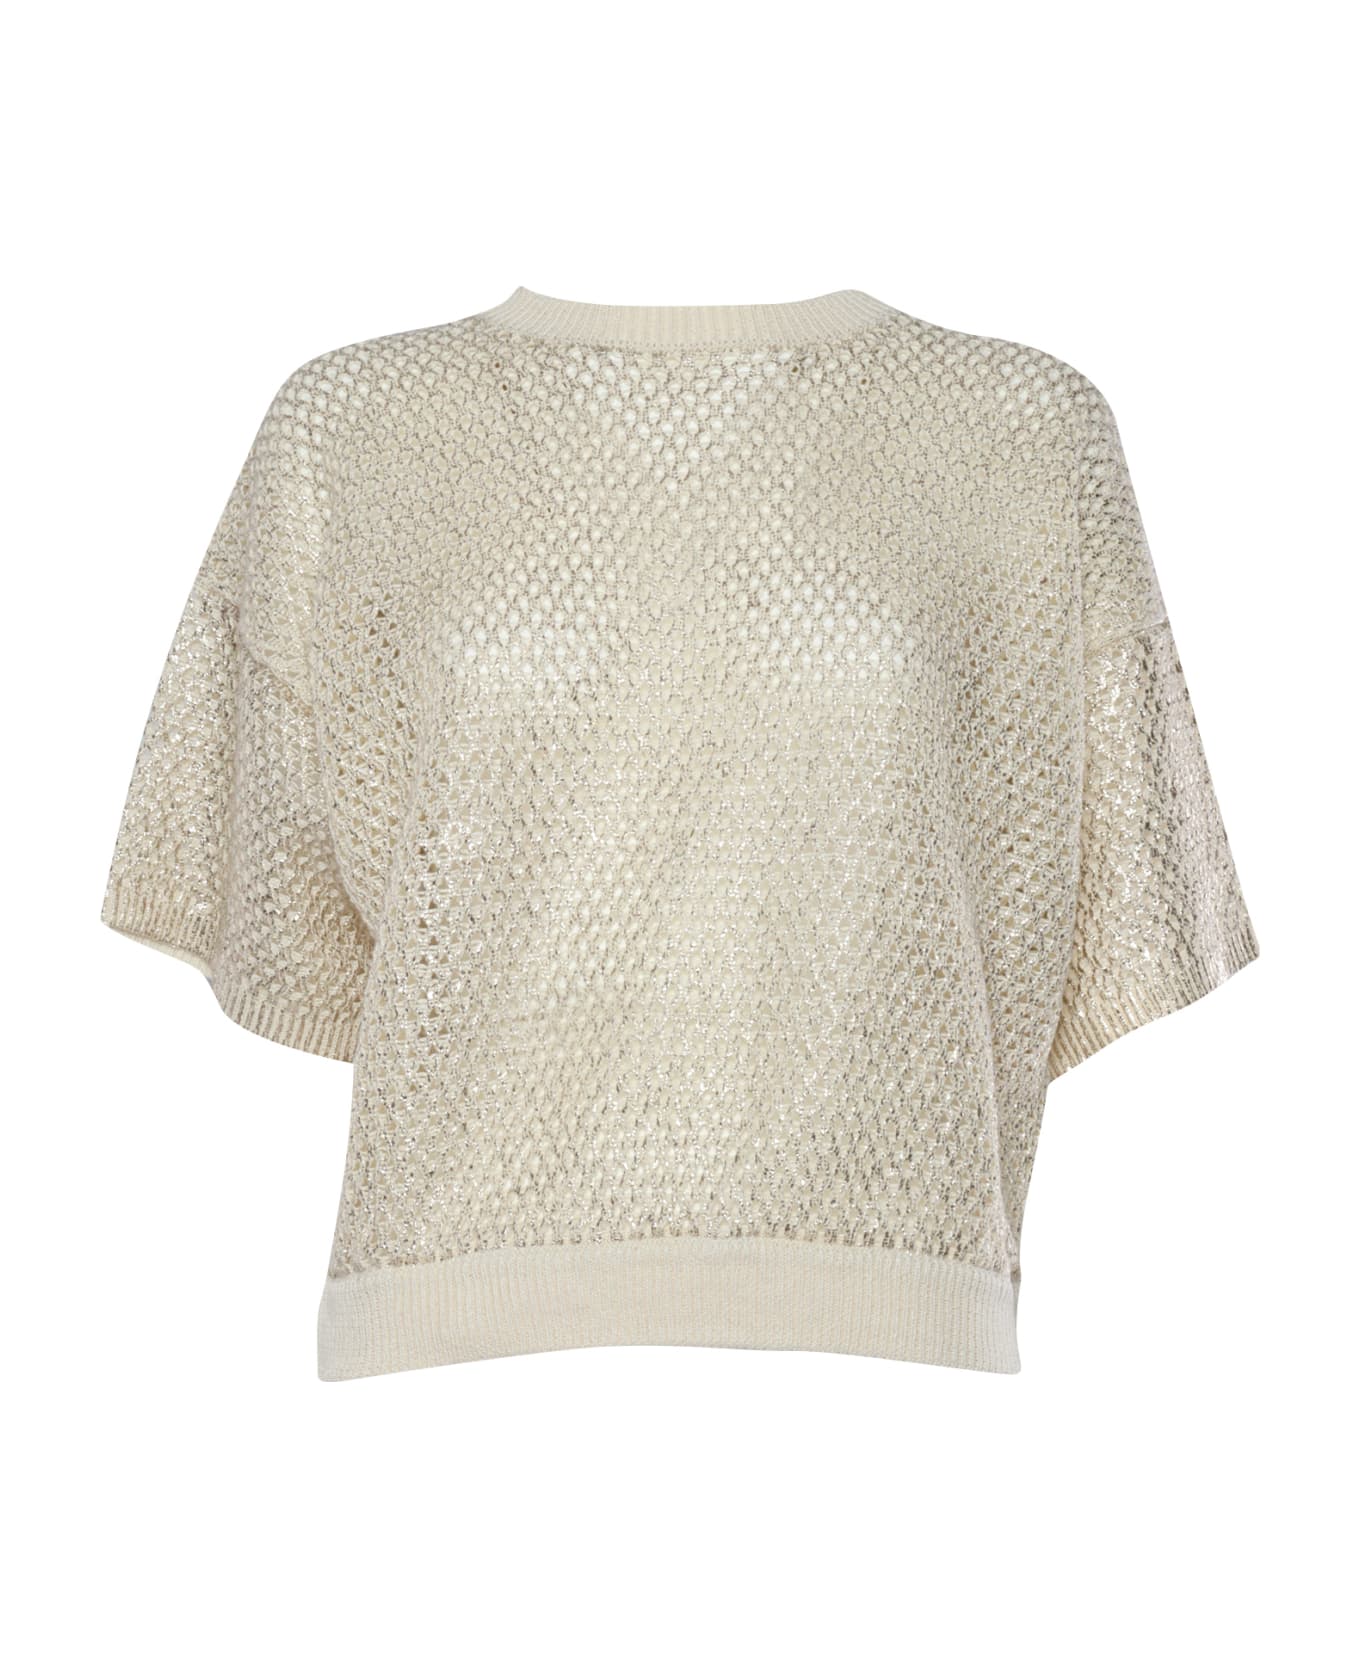 Peserico Gold Tricot Sweater - GOLD